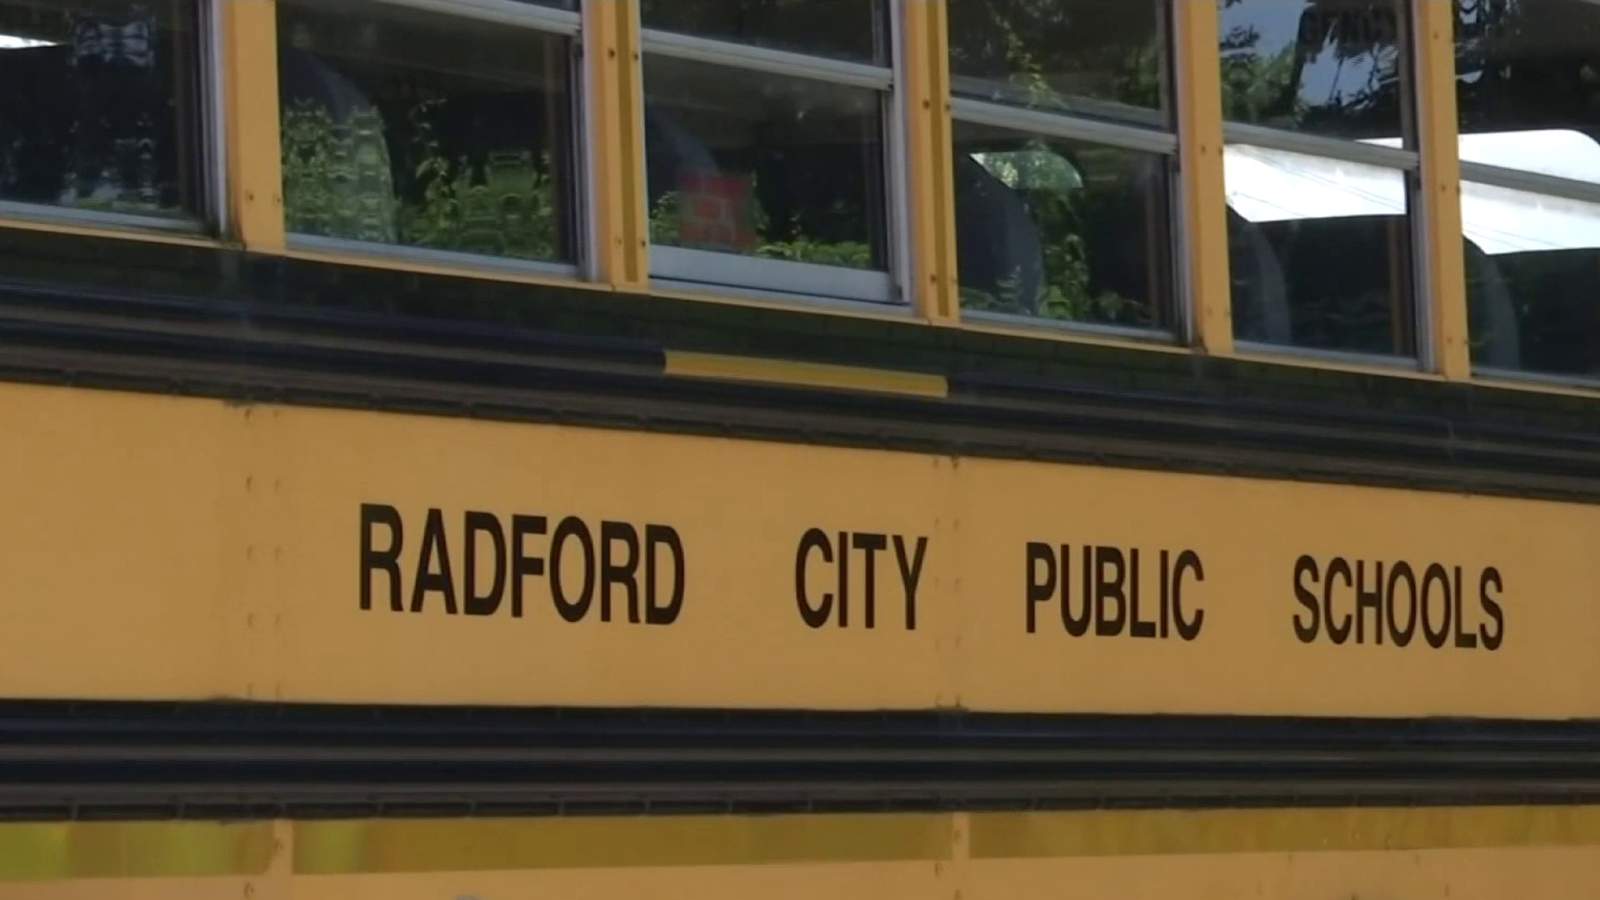 Radford City Schools continue virtual learning until September 14 due to COVID-19 concerns